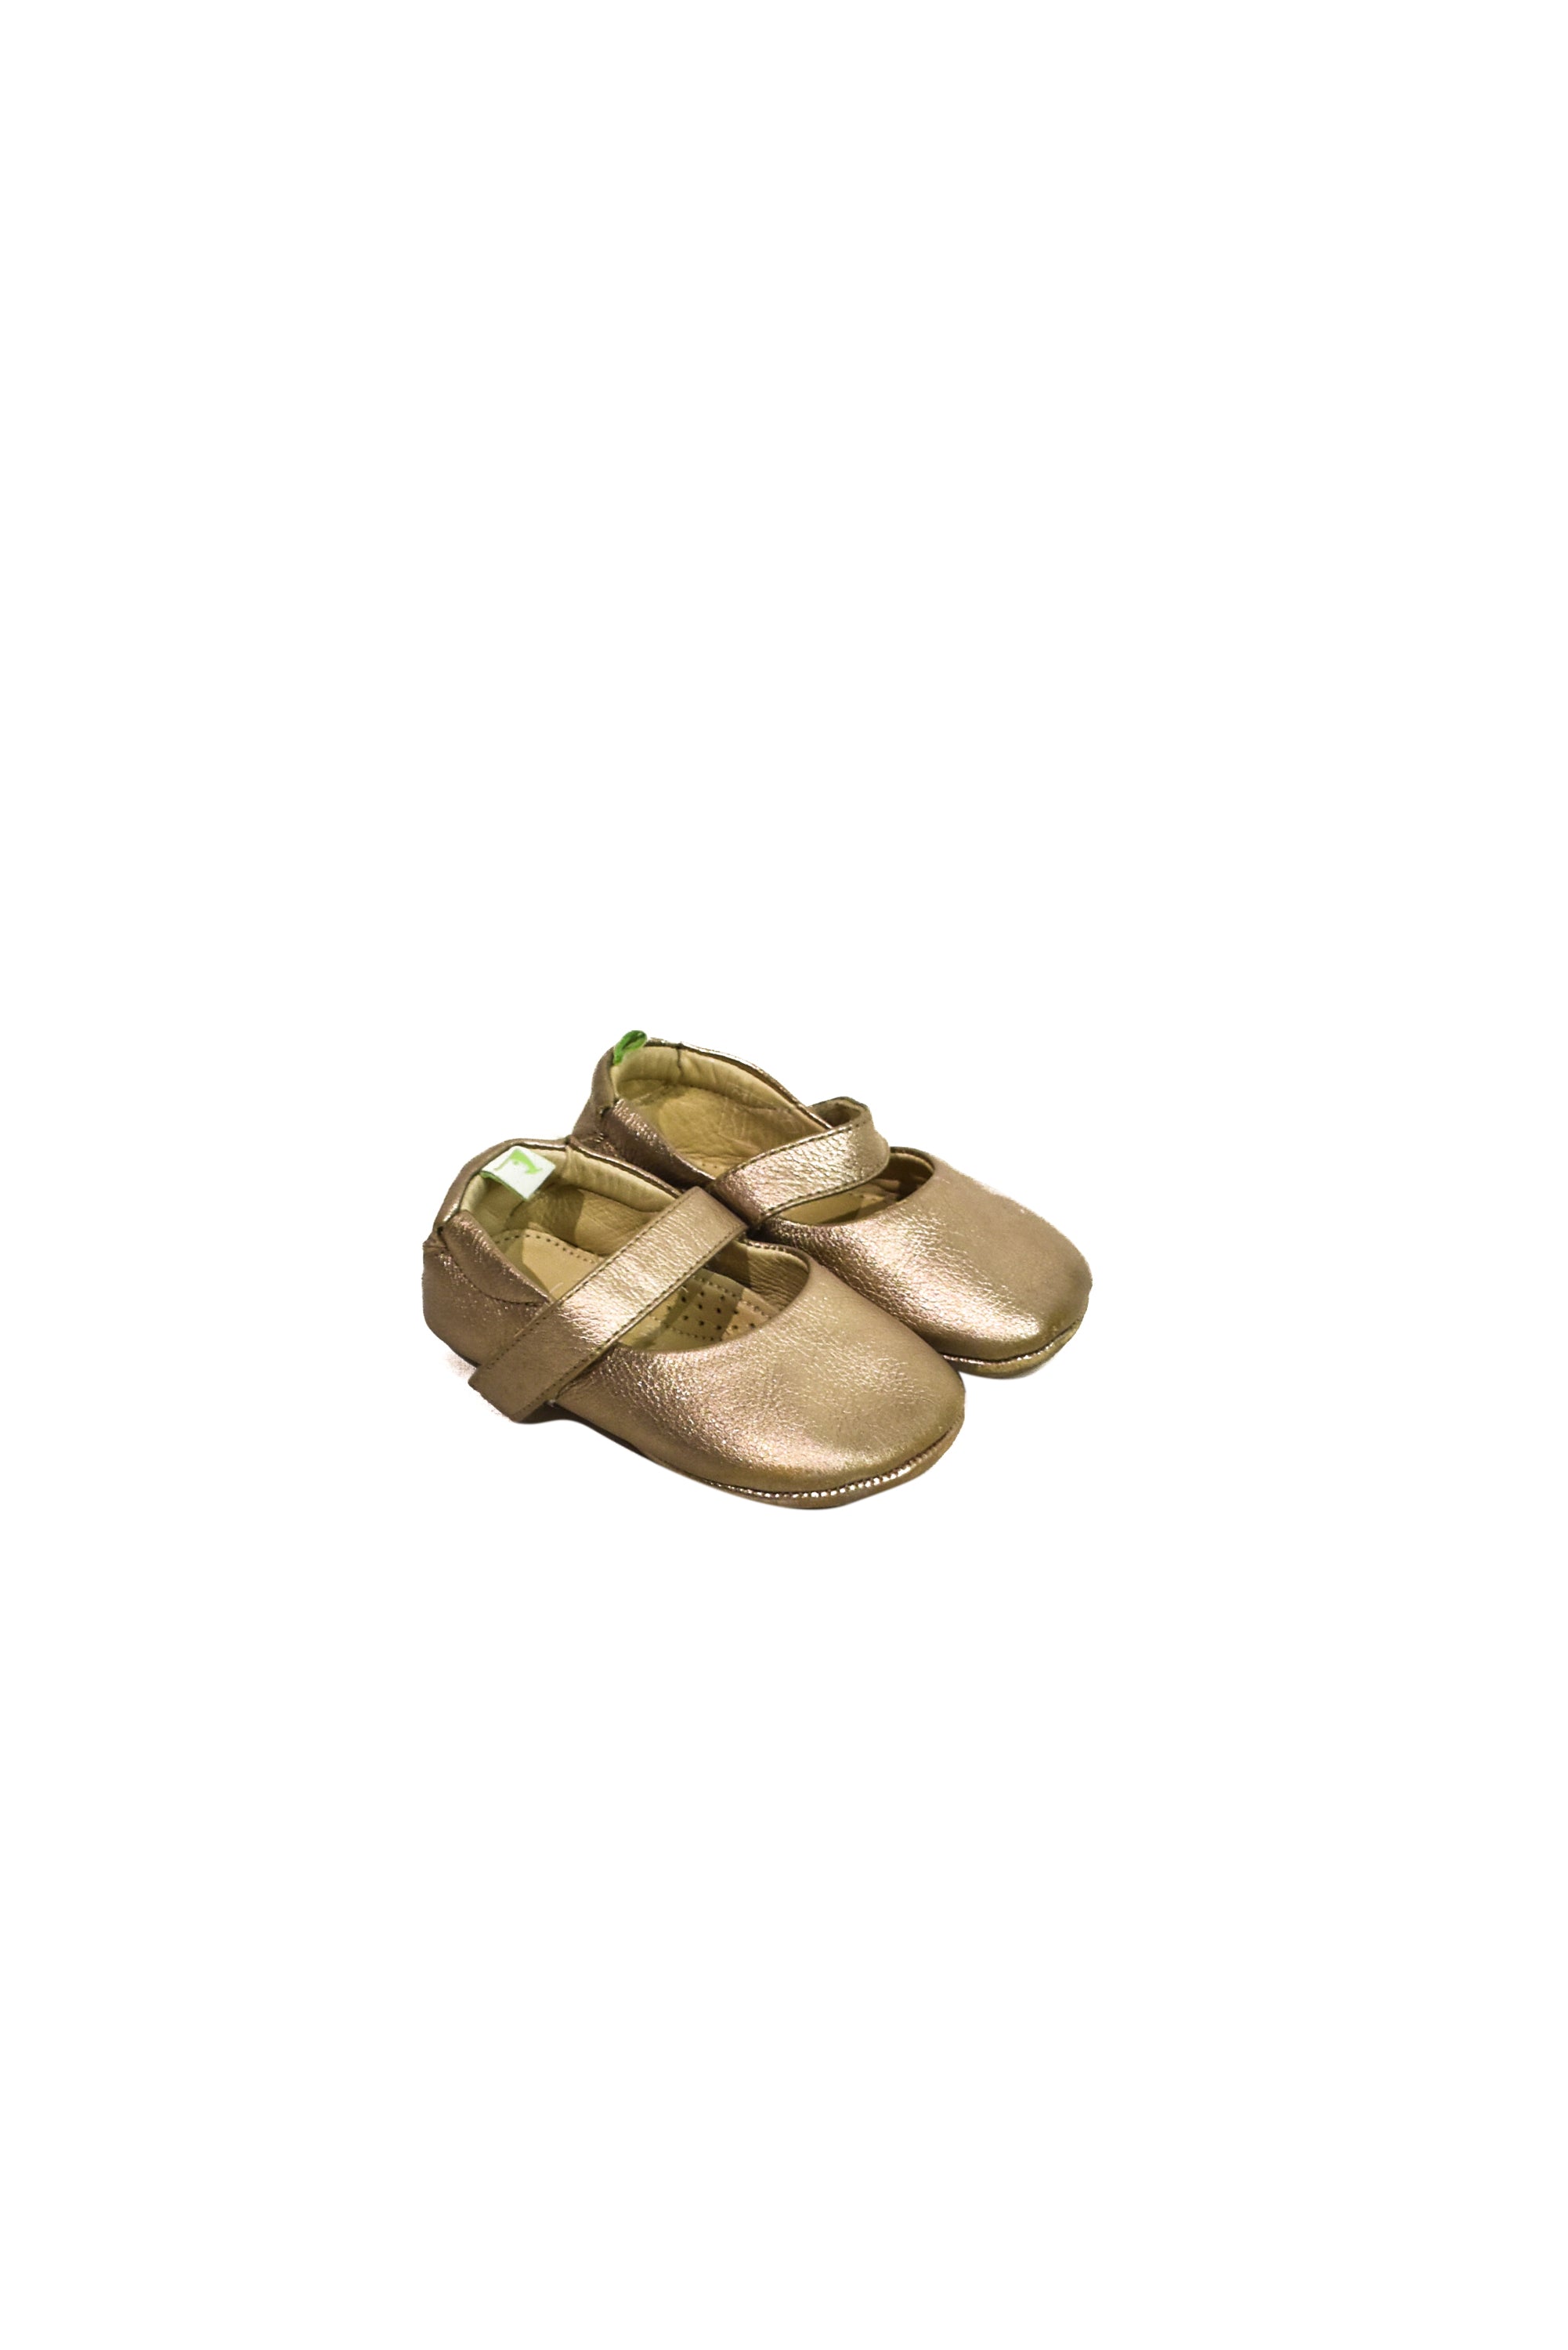 toey joey baby shoes